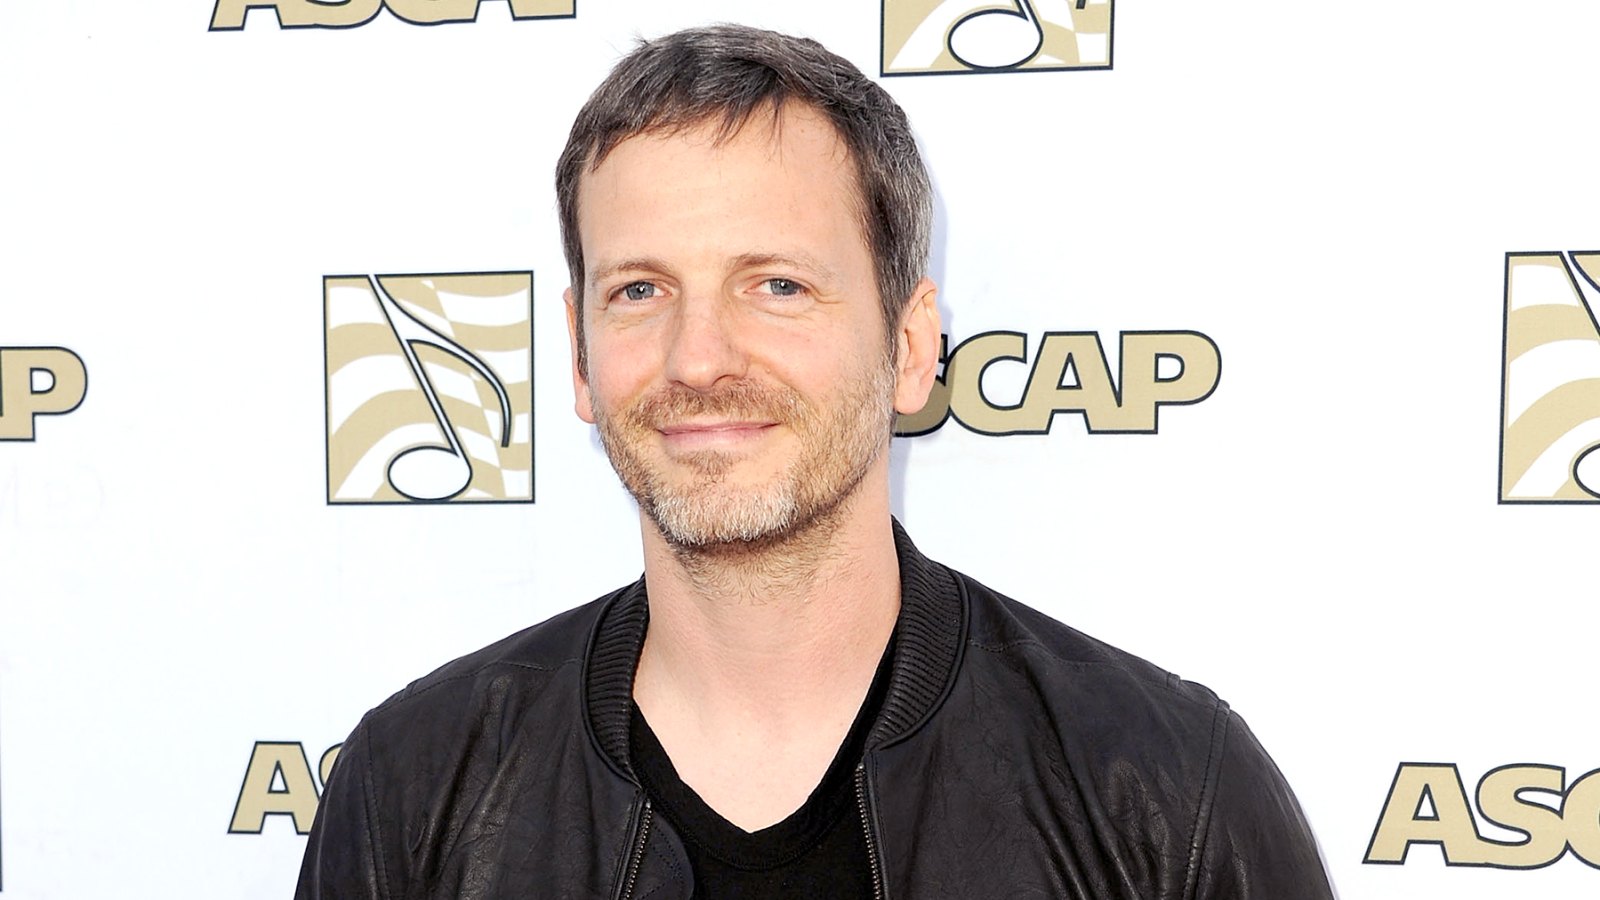 Dr. Luke arrives at the 30th Annual ASCAP Pop Music Awards at Loews Hollywood Hotel on April 17, 2013.